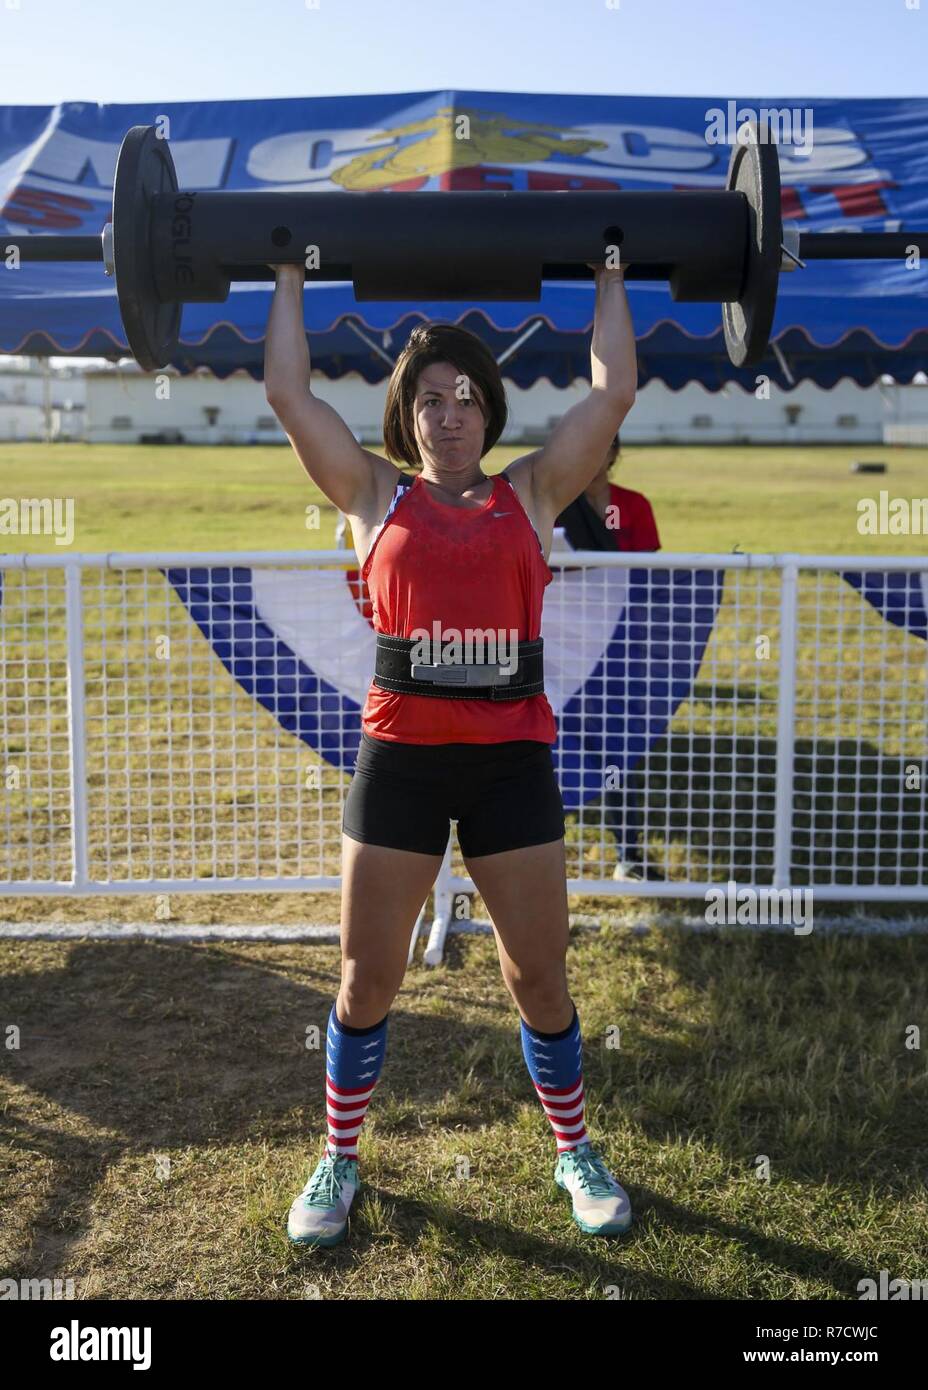 U.S. Navy Lt. Kimberly Pistell, battalion surgeon with Marine Wing Support Squadron-172, performs an overhead clean and press during the Okinawa’s Strongest competition on Camp Foster, Okinawa, Japan, Dec. 1, 2018. The event was held to encourage friendly competition through physical challenges like deadlifts, sled pulls, atlas stone lifts and tire flips. Stock Photo